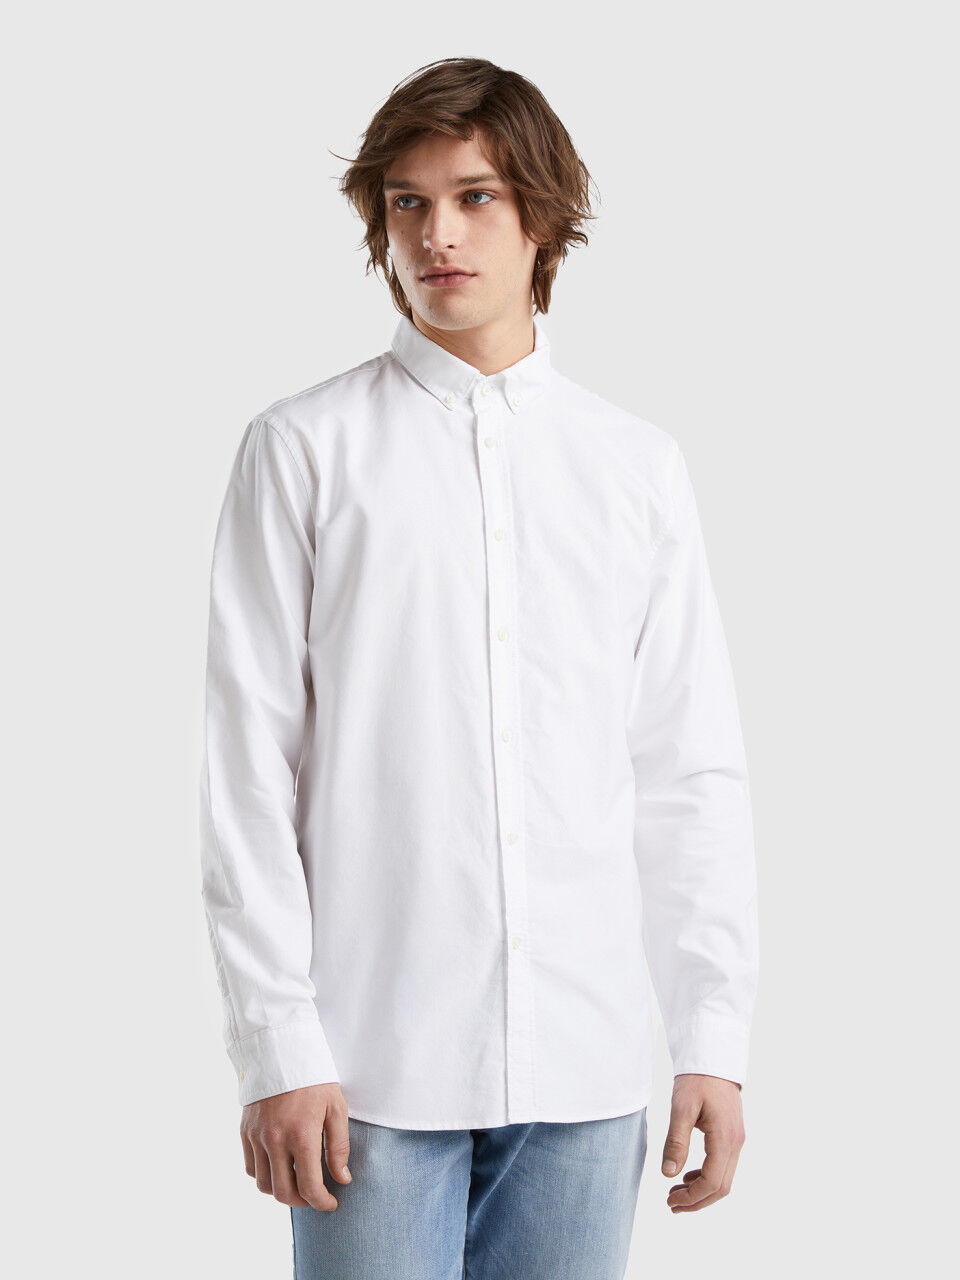 Slim fit shirt in 100% cotton